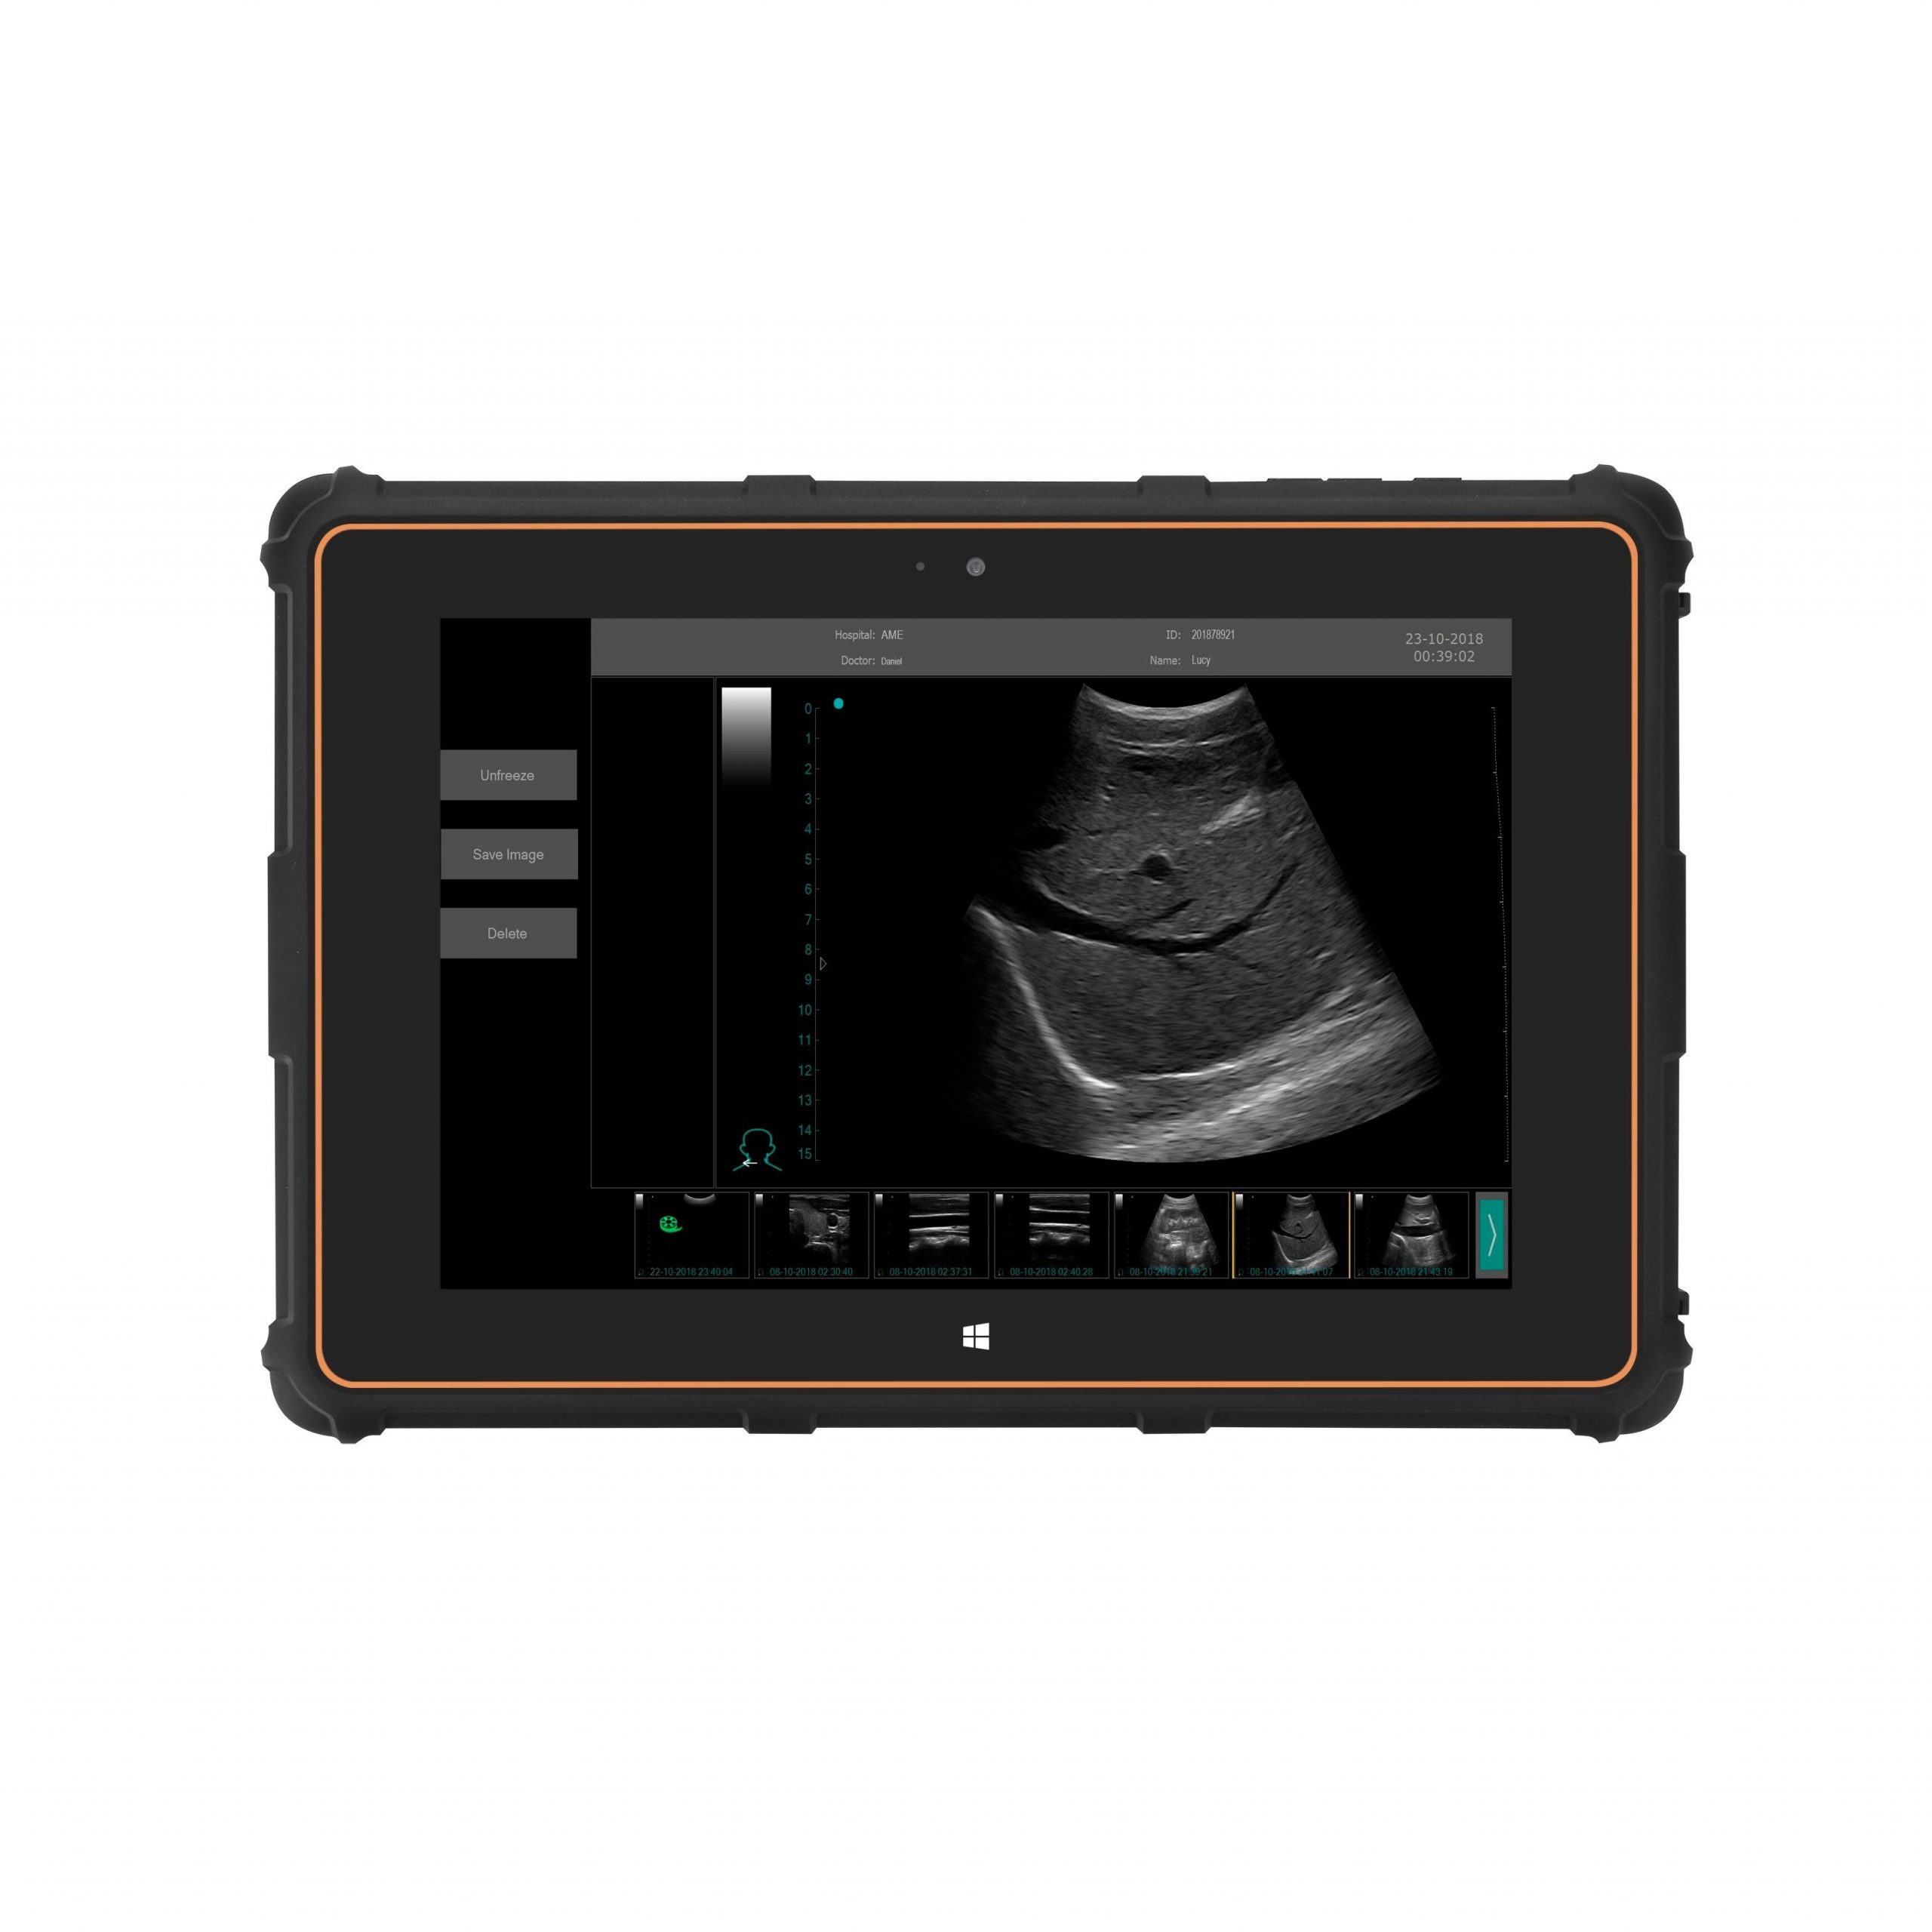 SCAN-RESULTS-OF-USB-Portable Ultrasound Scanner USB-UL1